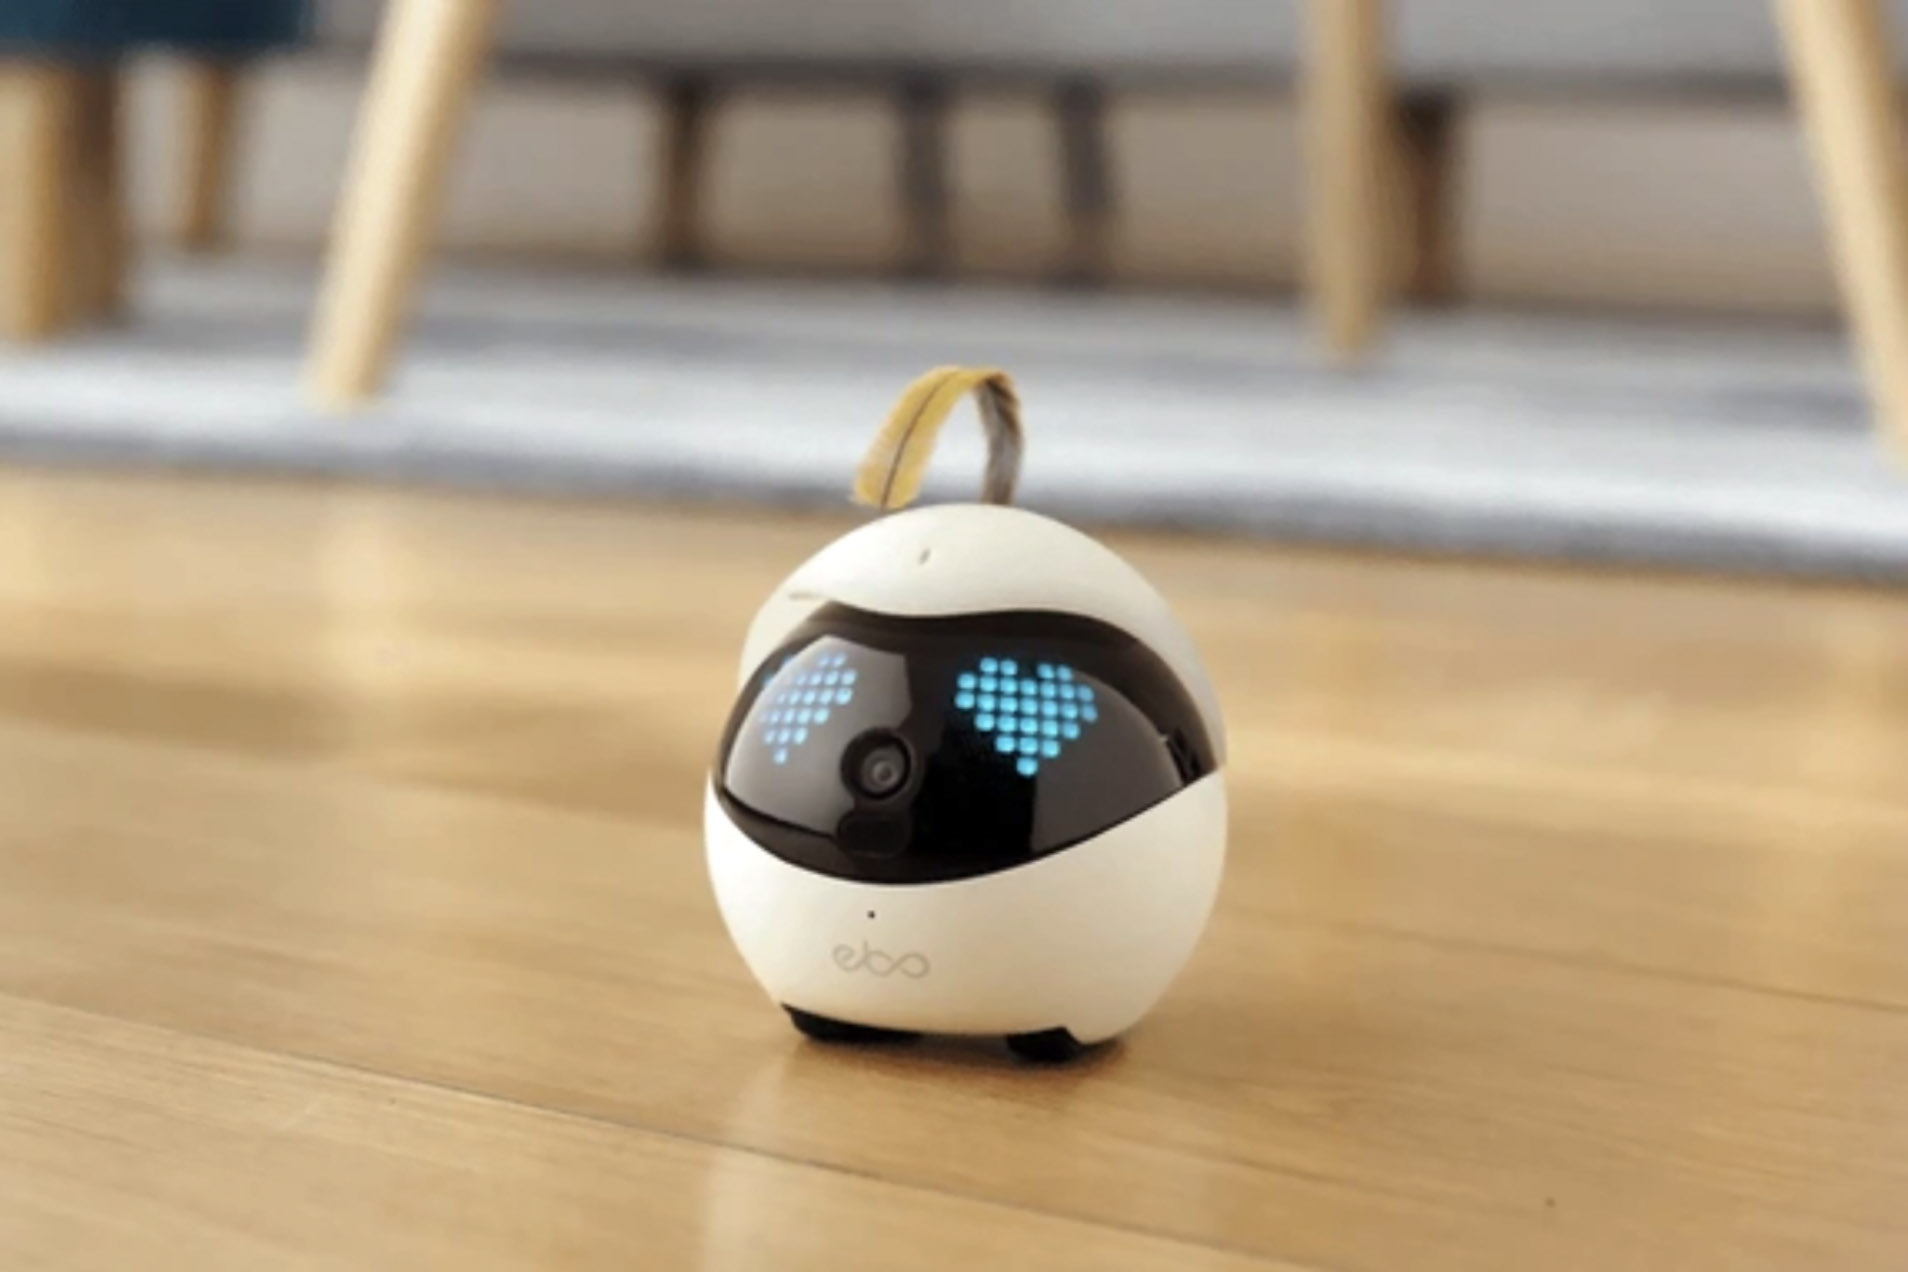 Enabot Ebo Familybot: Your Moving Camera at Home